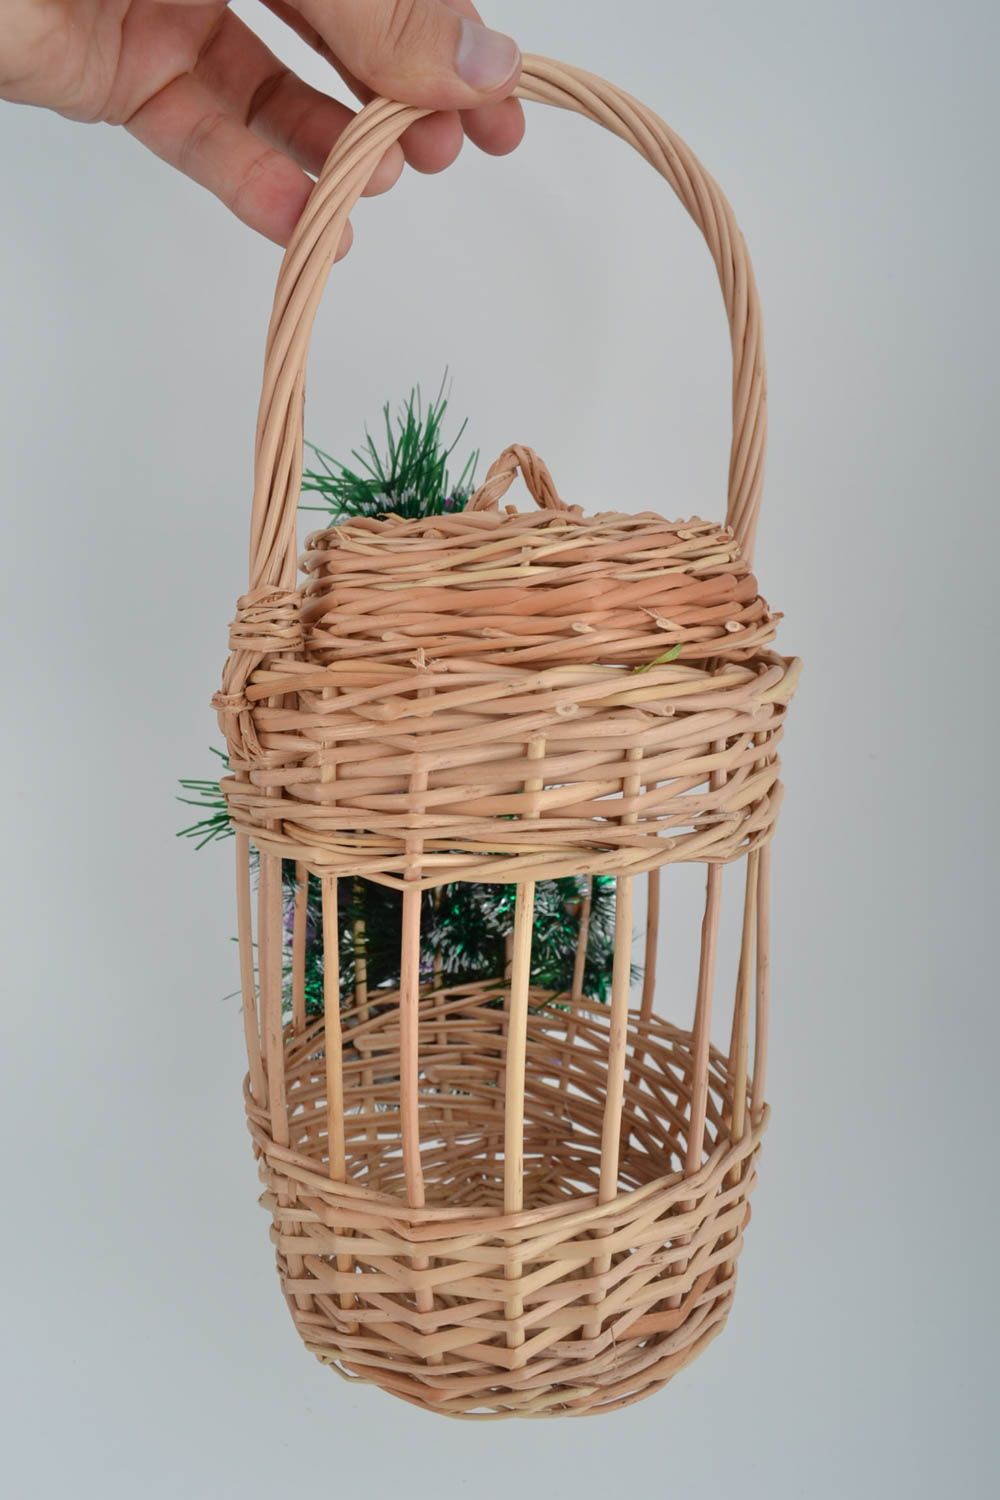 Unusual handmade woven basket with lid Easter basket ideas Easter gift ideas photo 5